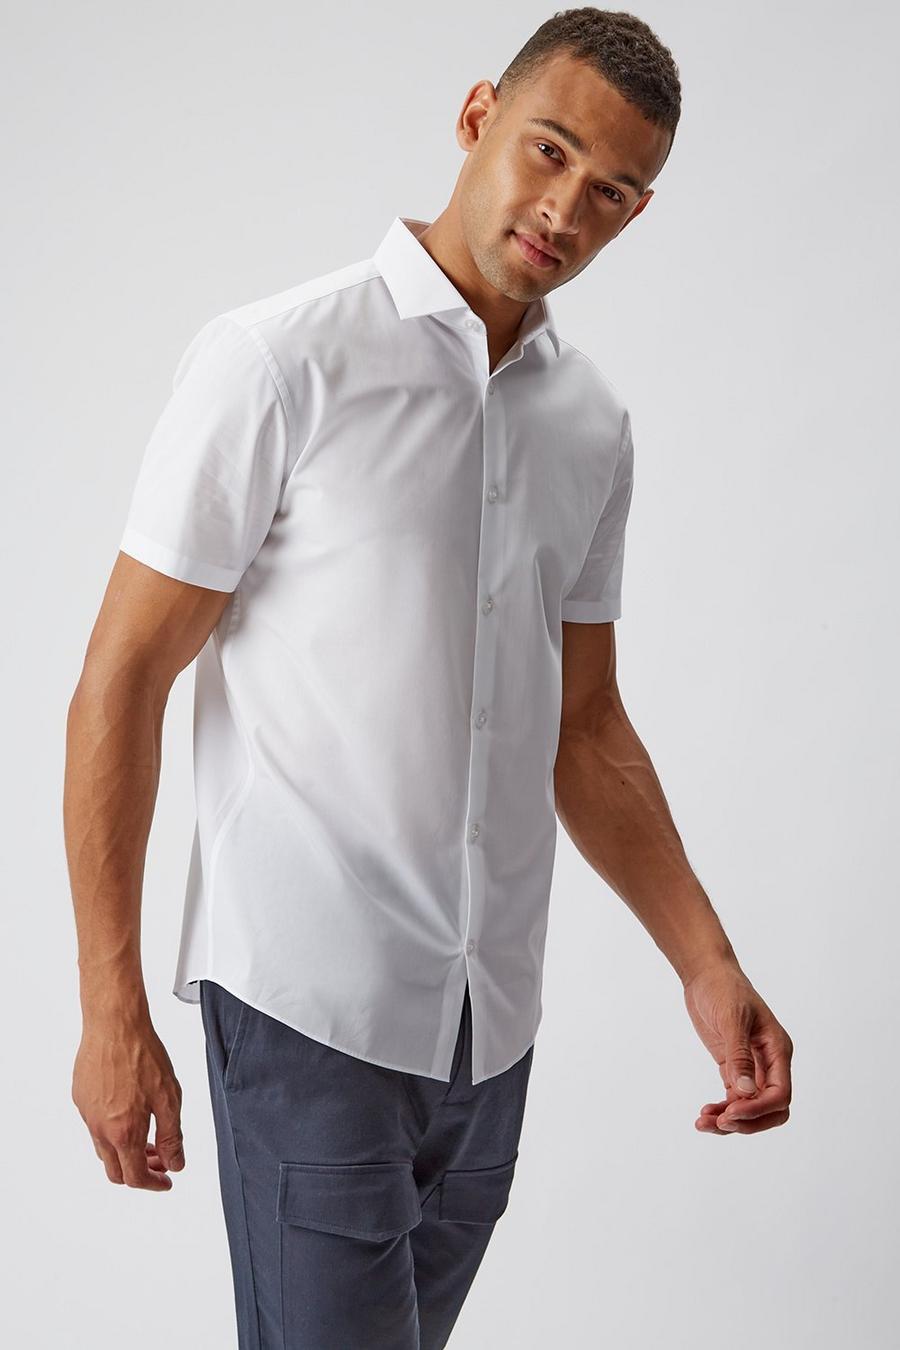 Short Sleeve White Tailored Fit Shirt